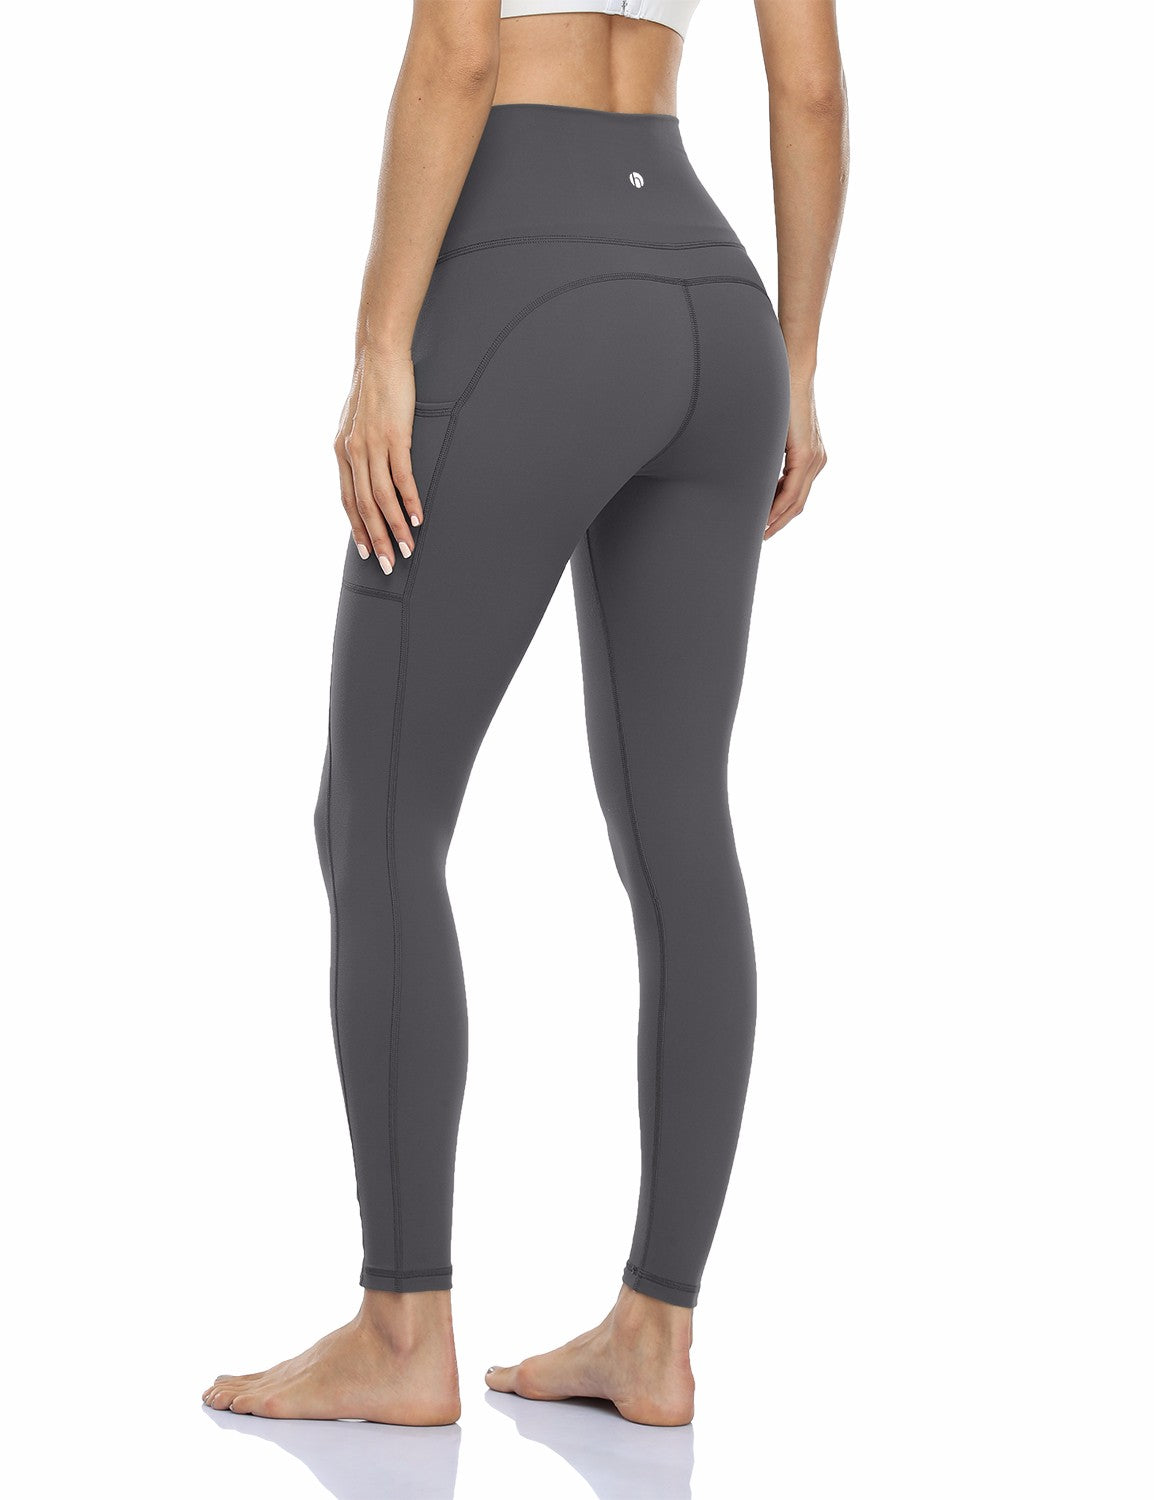 HeyNuts Essential 7/8 Leggings High Waisted Yoga Pants for Women, Buttery  Soft Workout Pants Compression Leggings with Inner Pockets Cassis_25''  XS(0/2), Cassis, XS : Buy Online at Best Price in KSA 